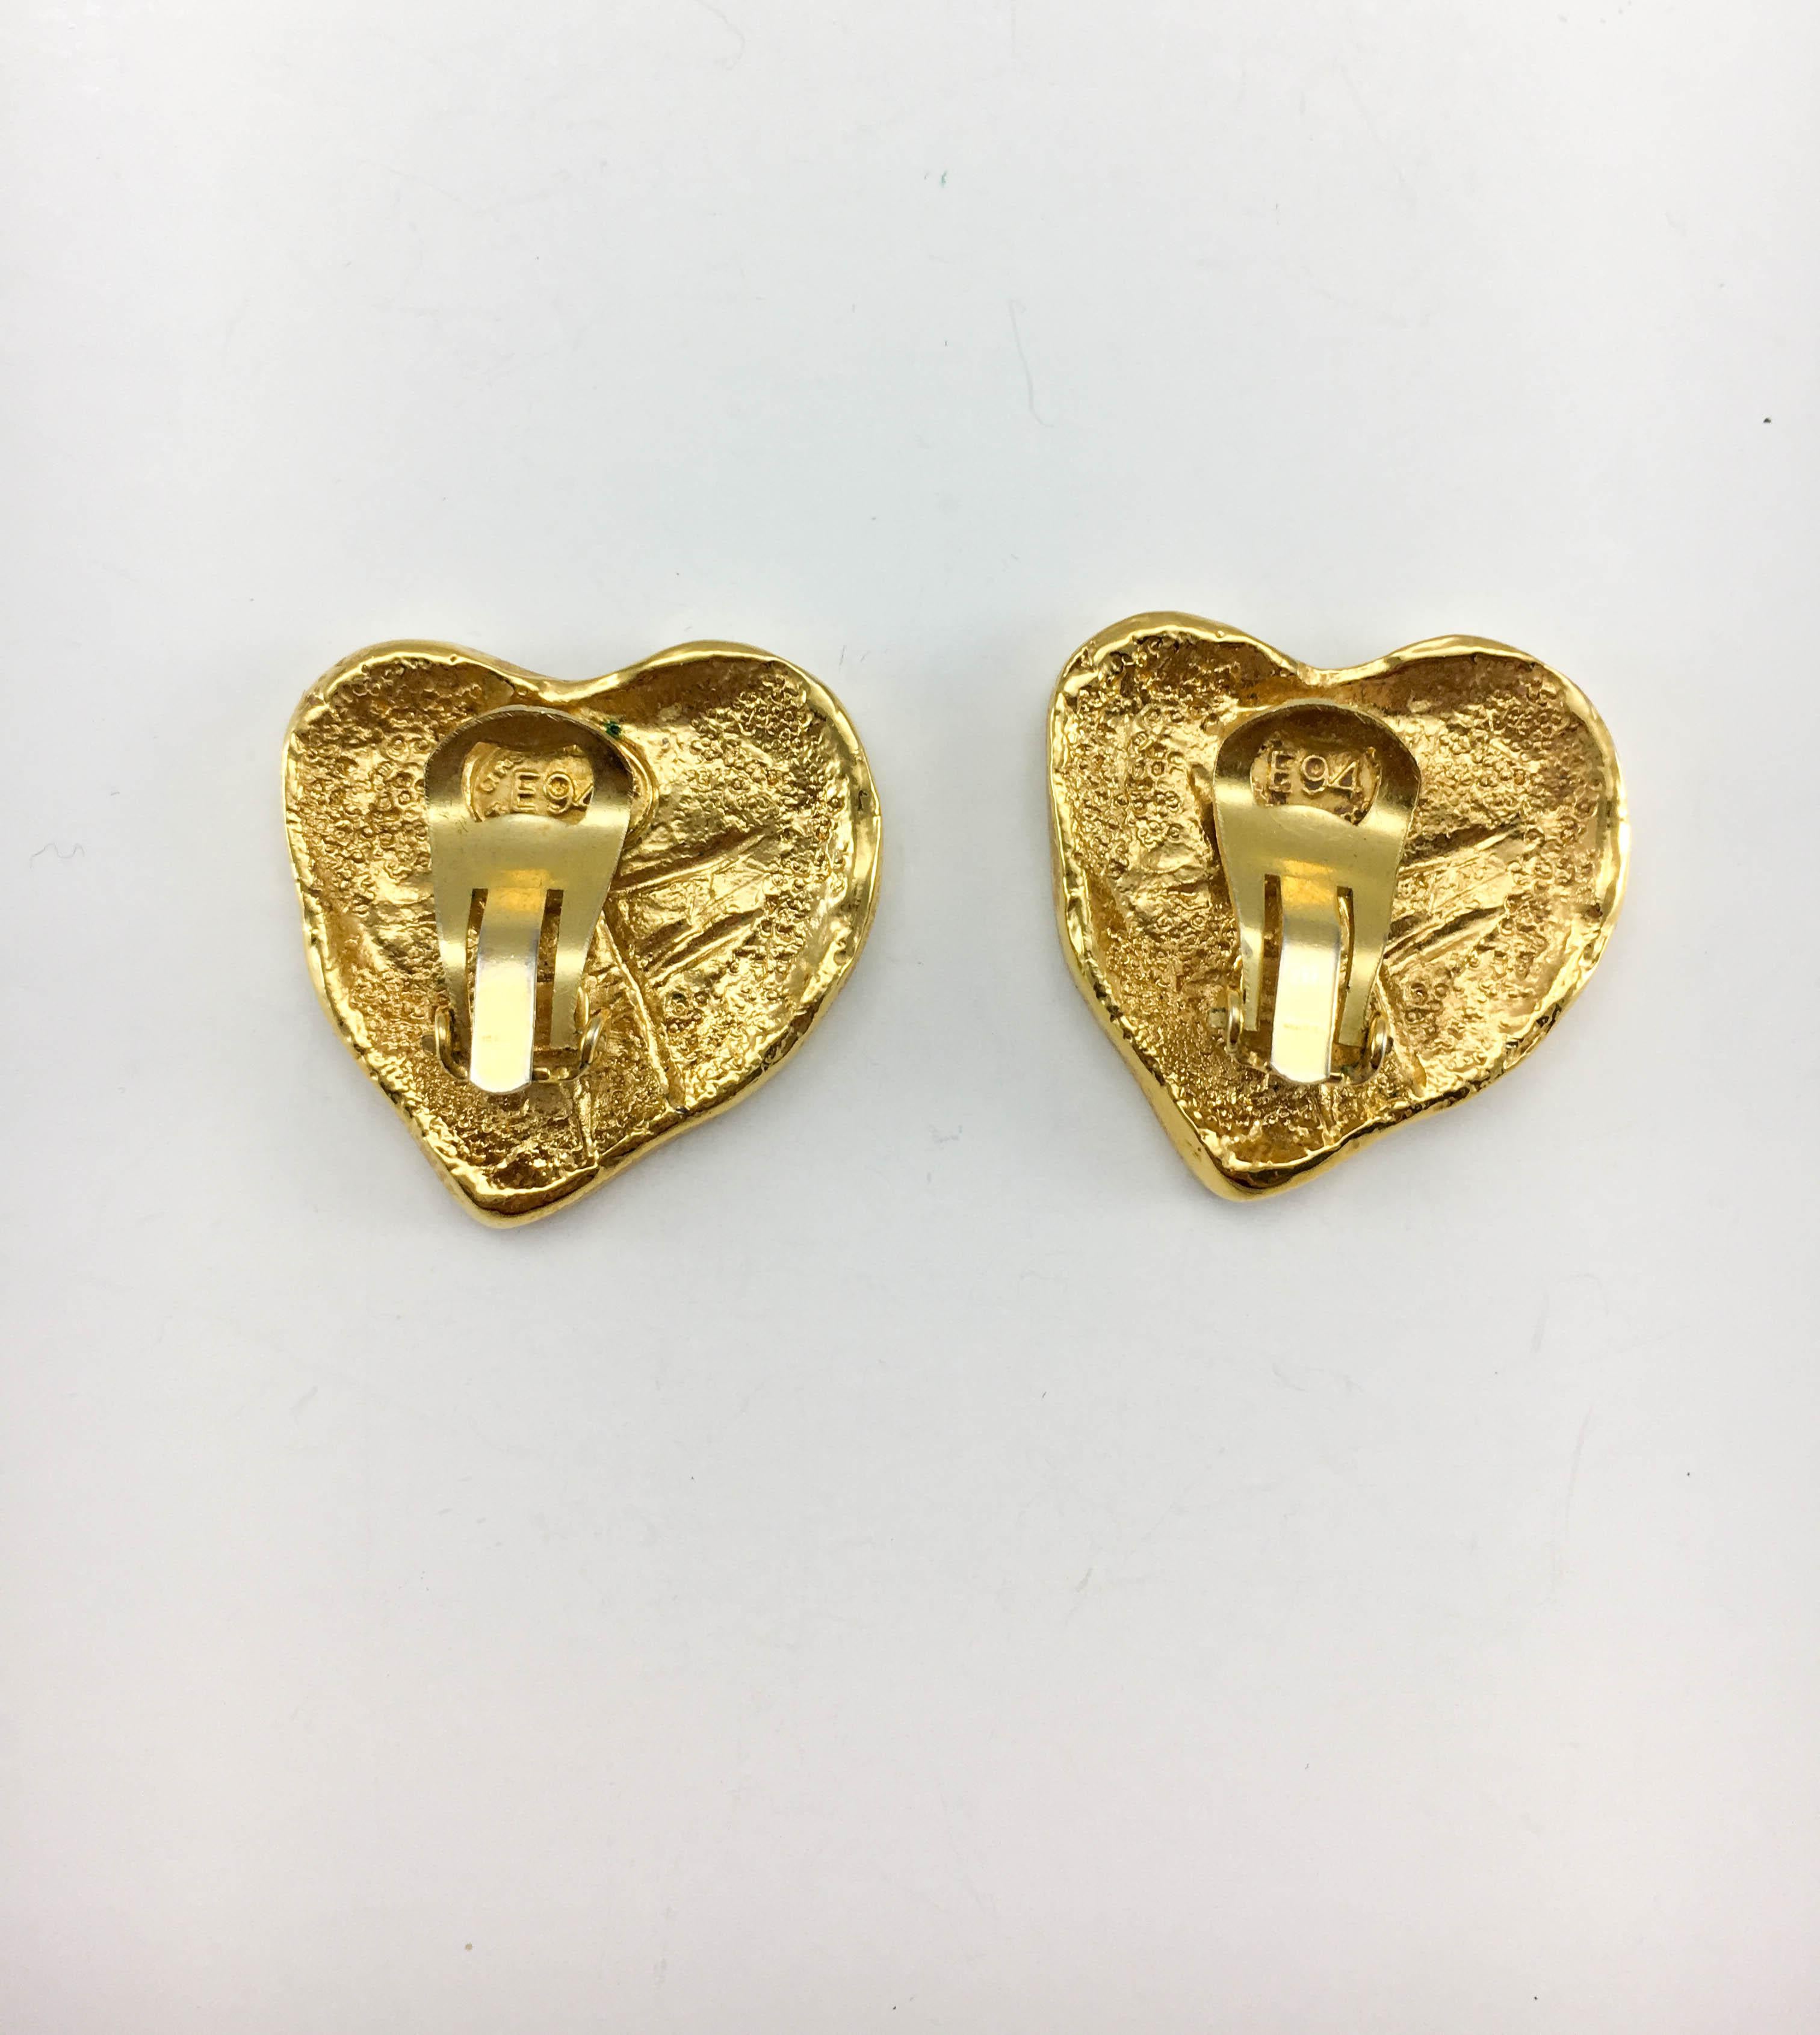 1994 Christian Lacroix Gold-Plated Modernist Heart Earrings For Sale 3